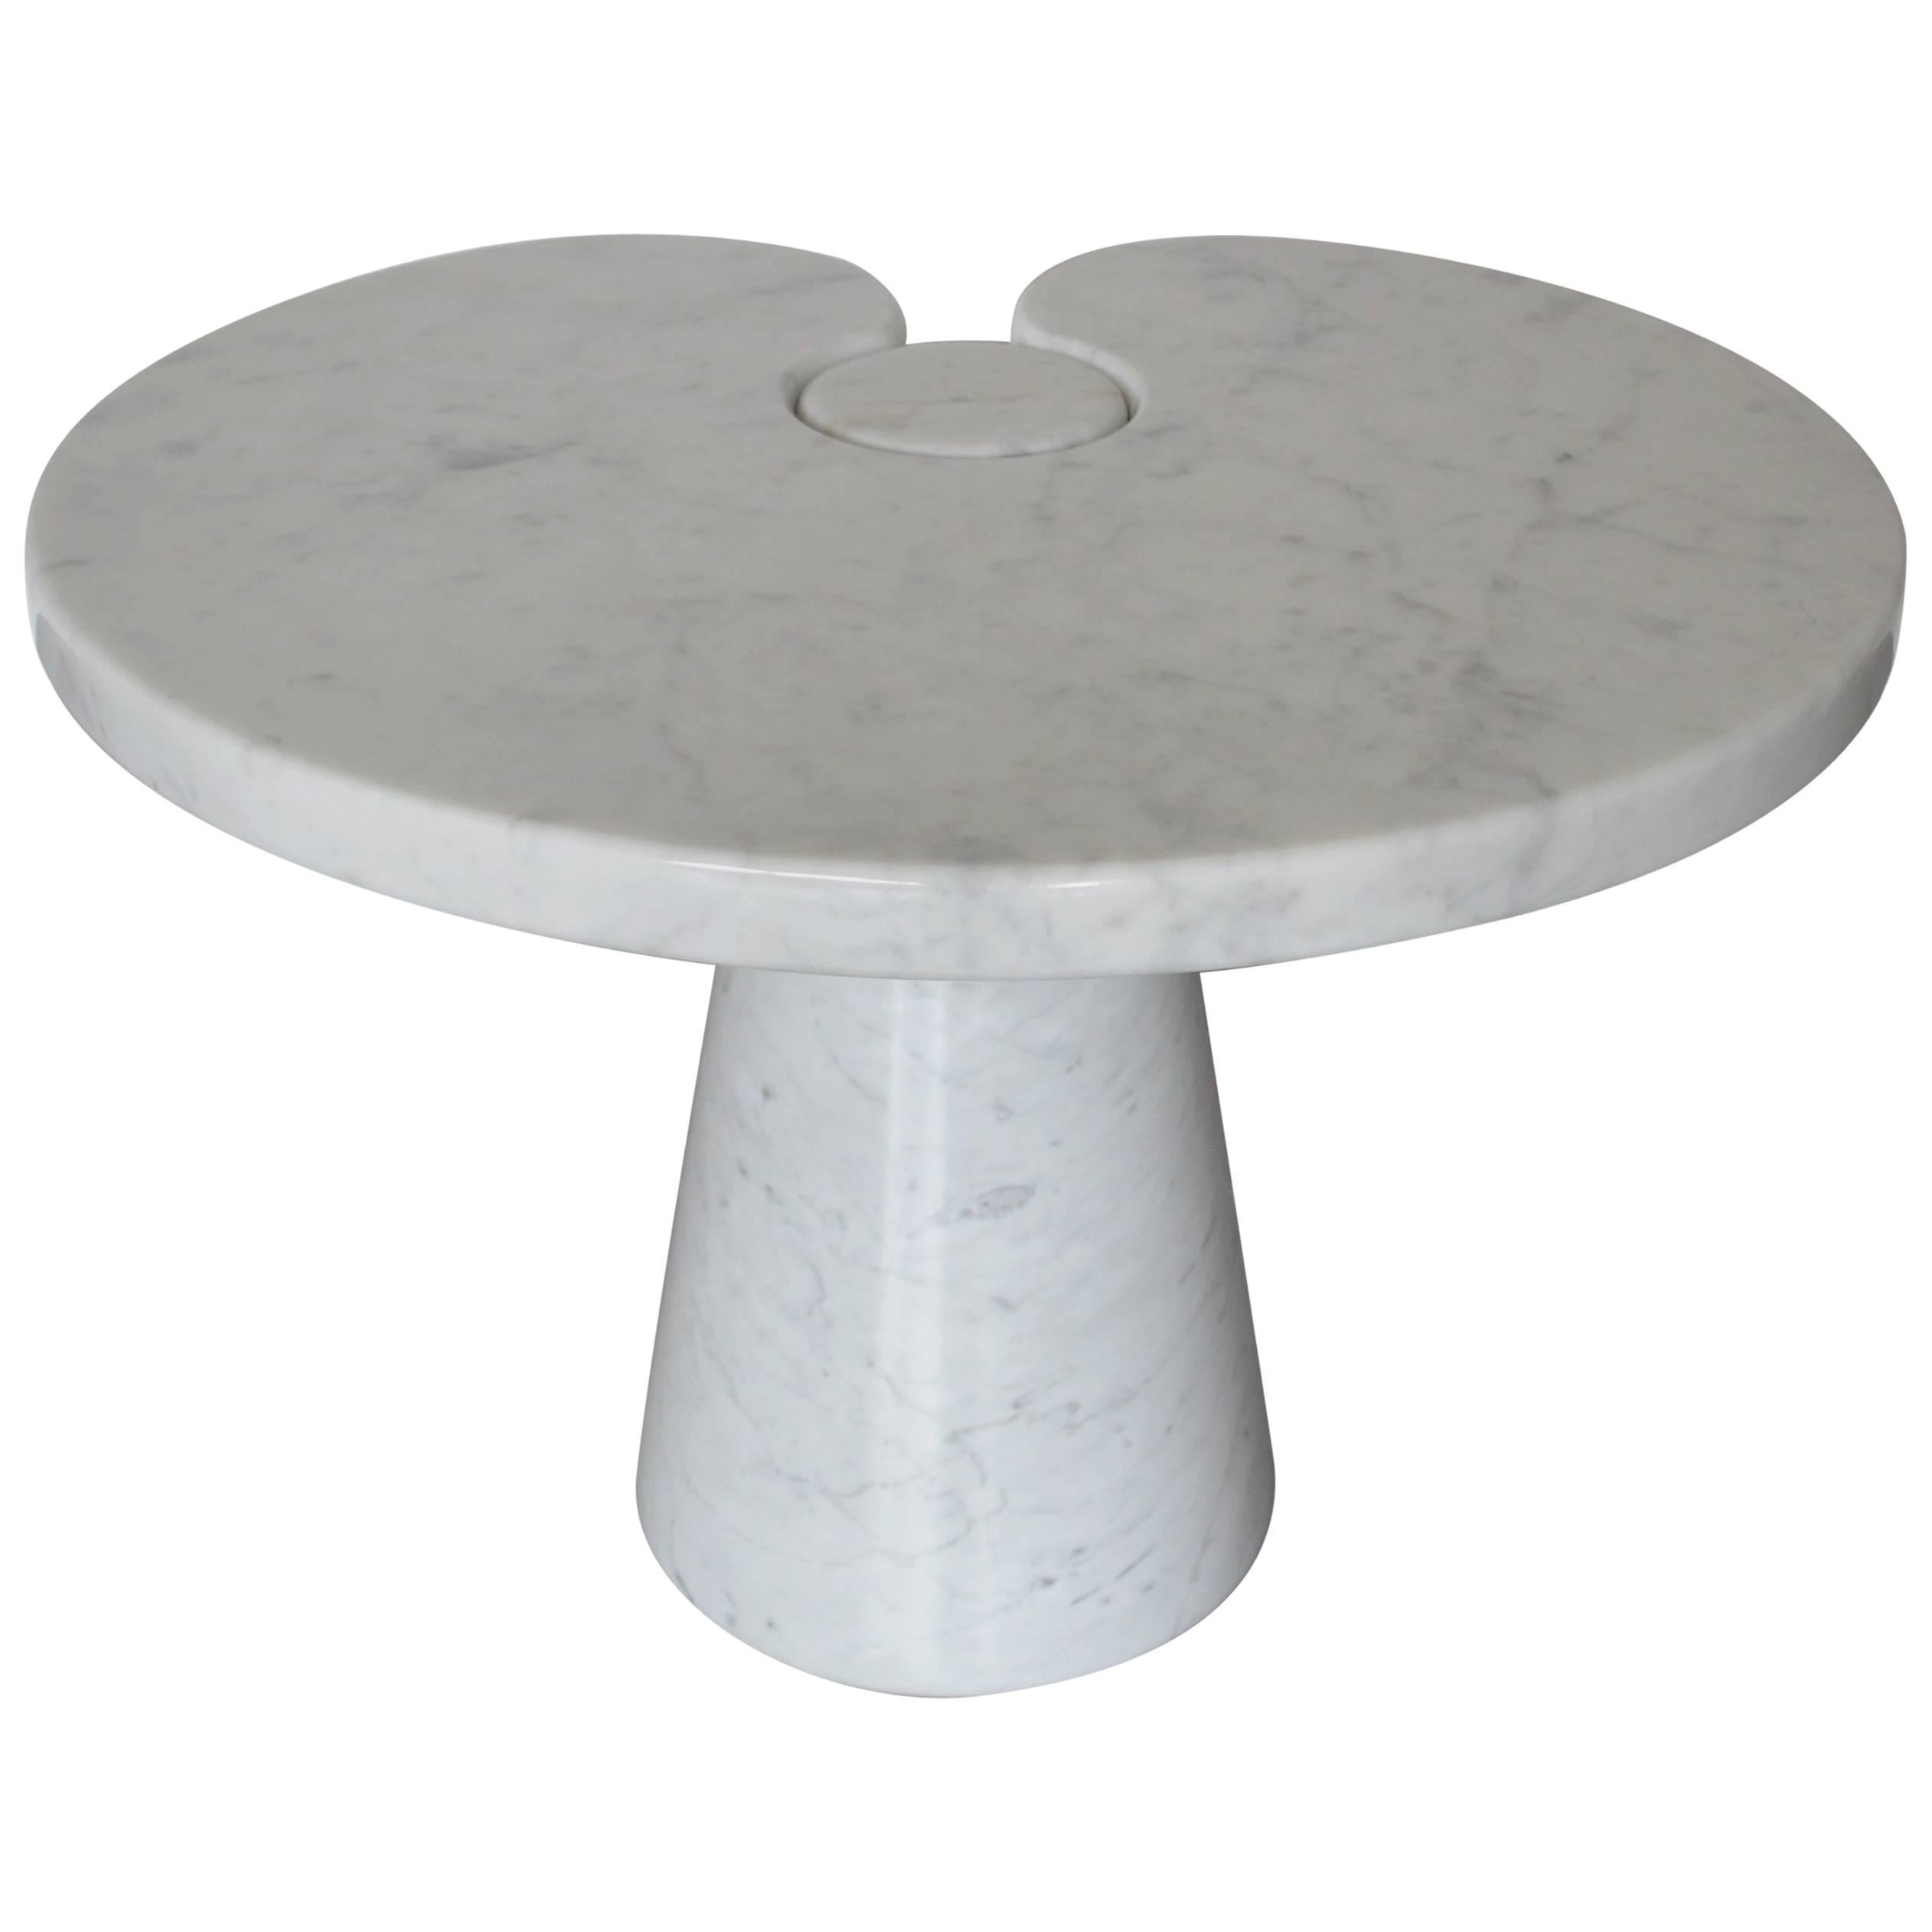 Angelo Mangiarotti "Eros" Side Table For Sale